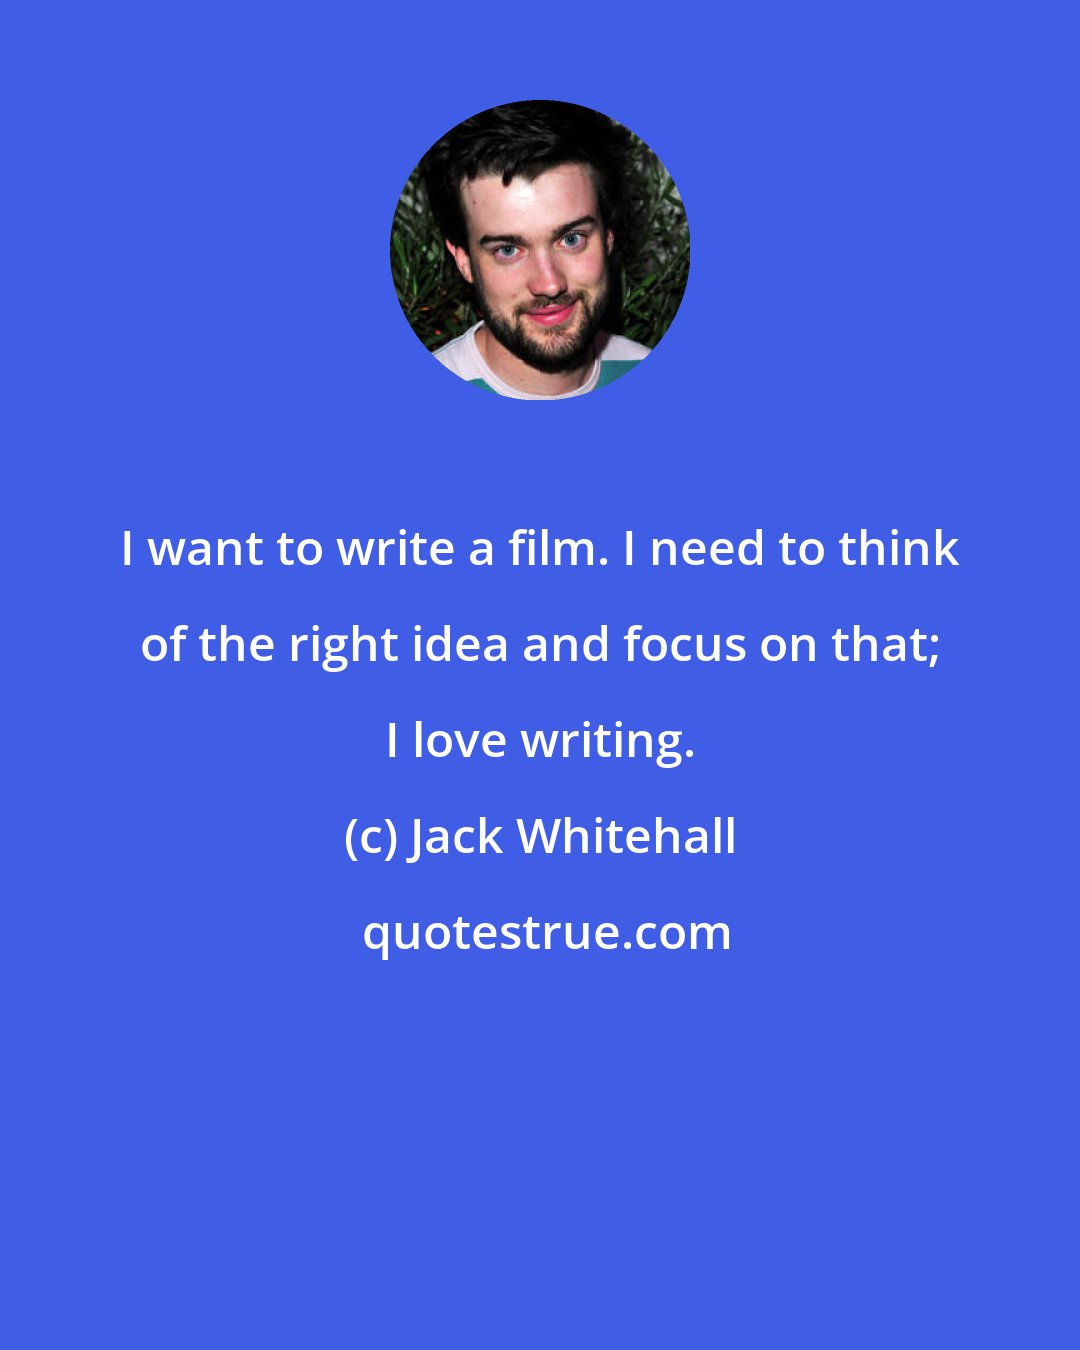 Jack Whitehall: I want to write a film. I need to think of the right idea and focus on that; I love writing.